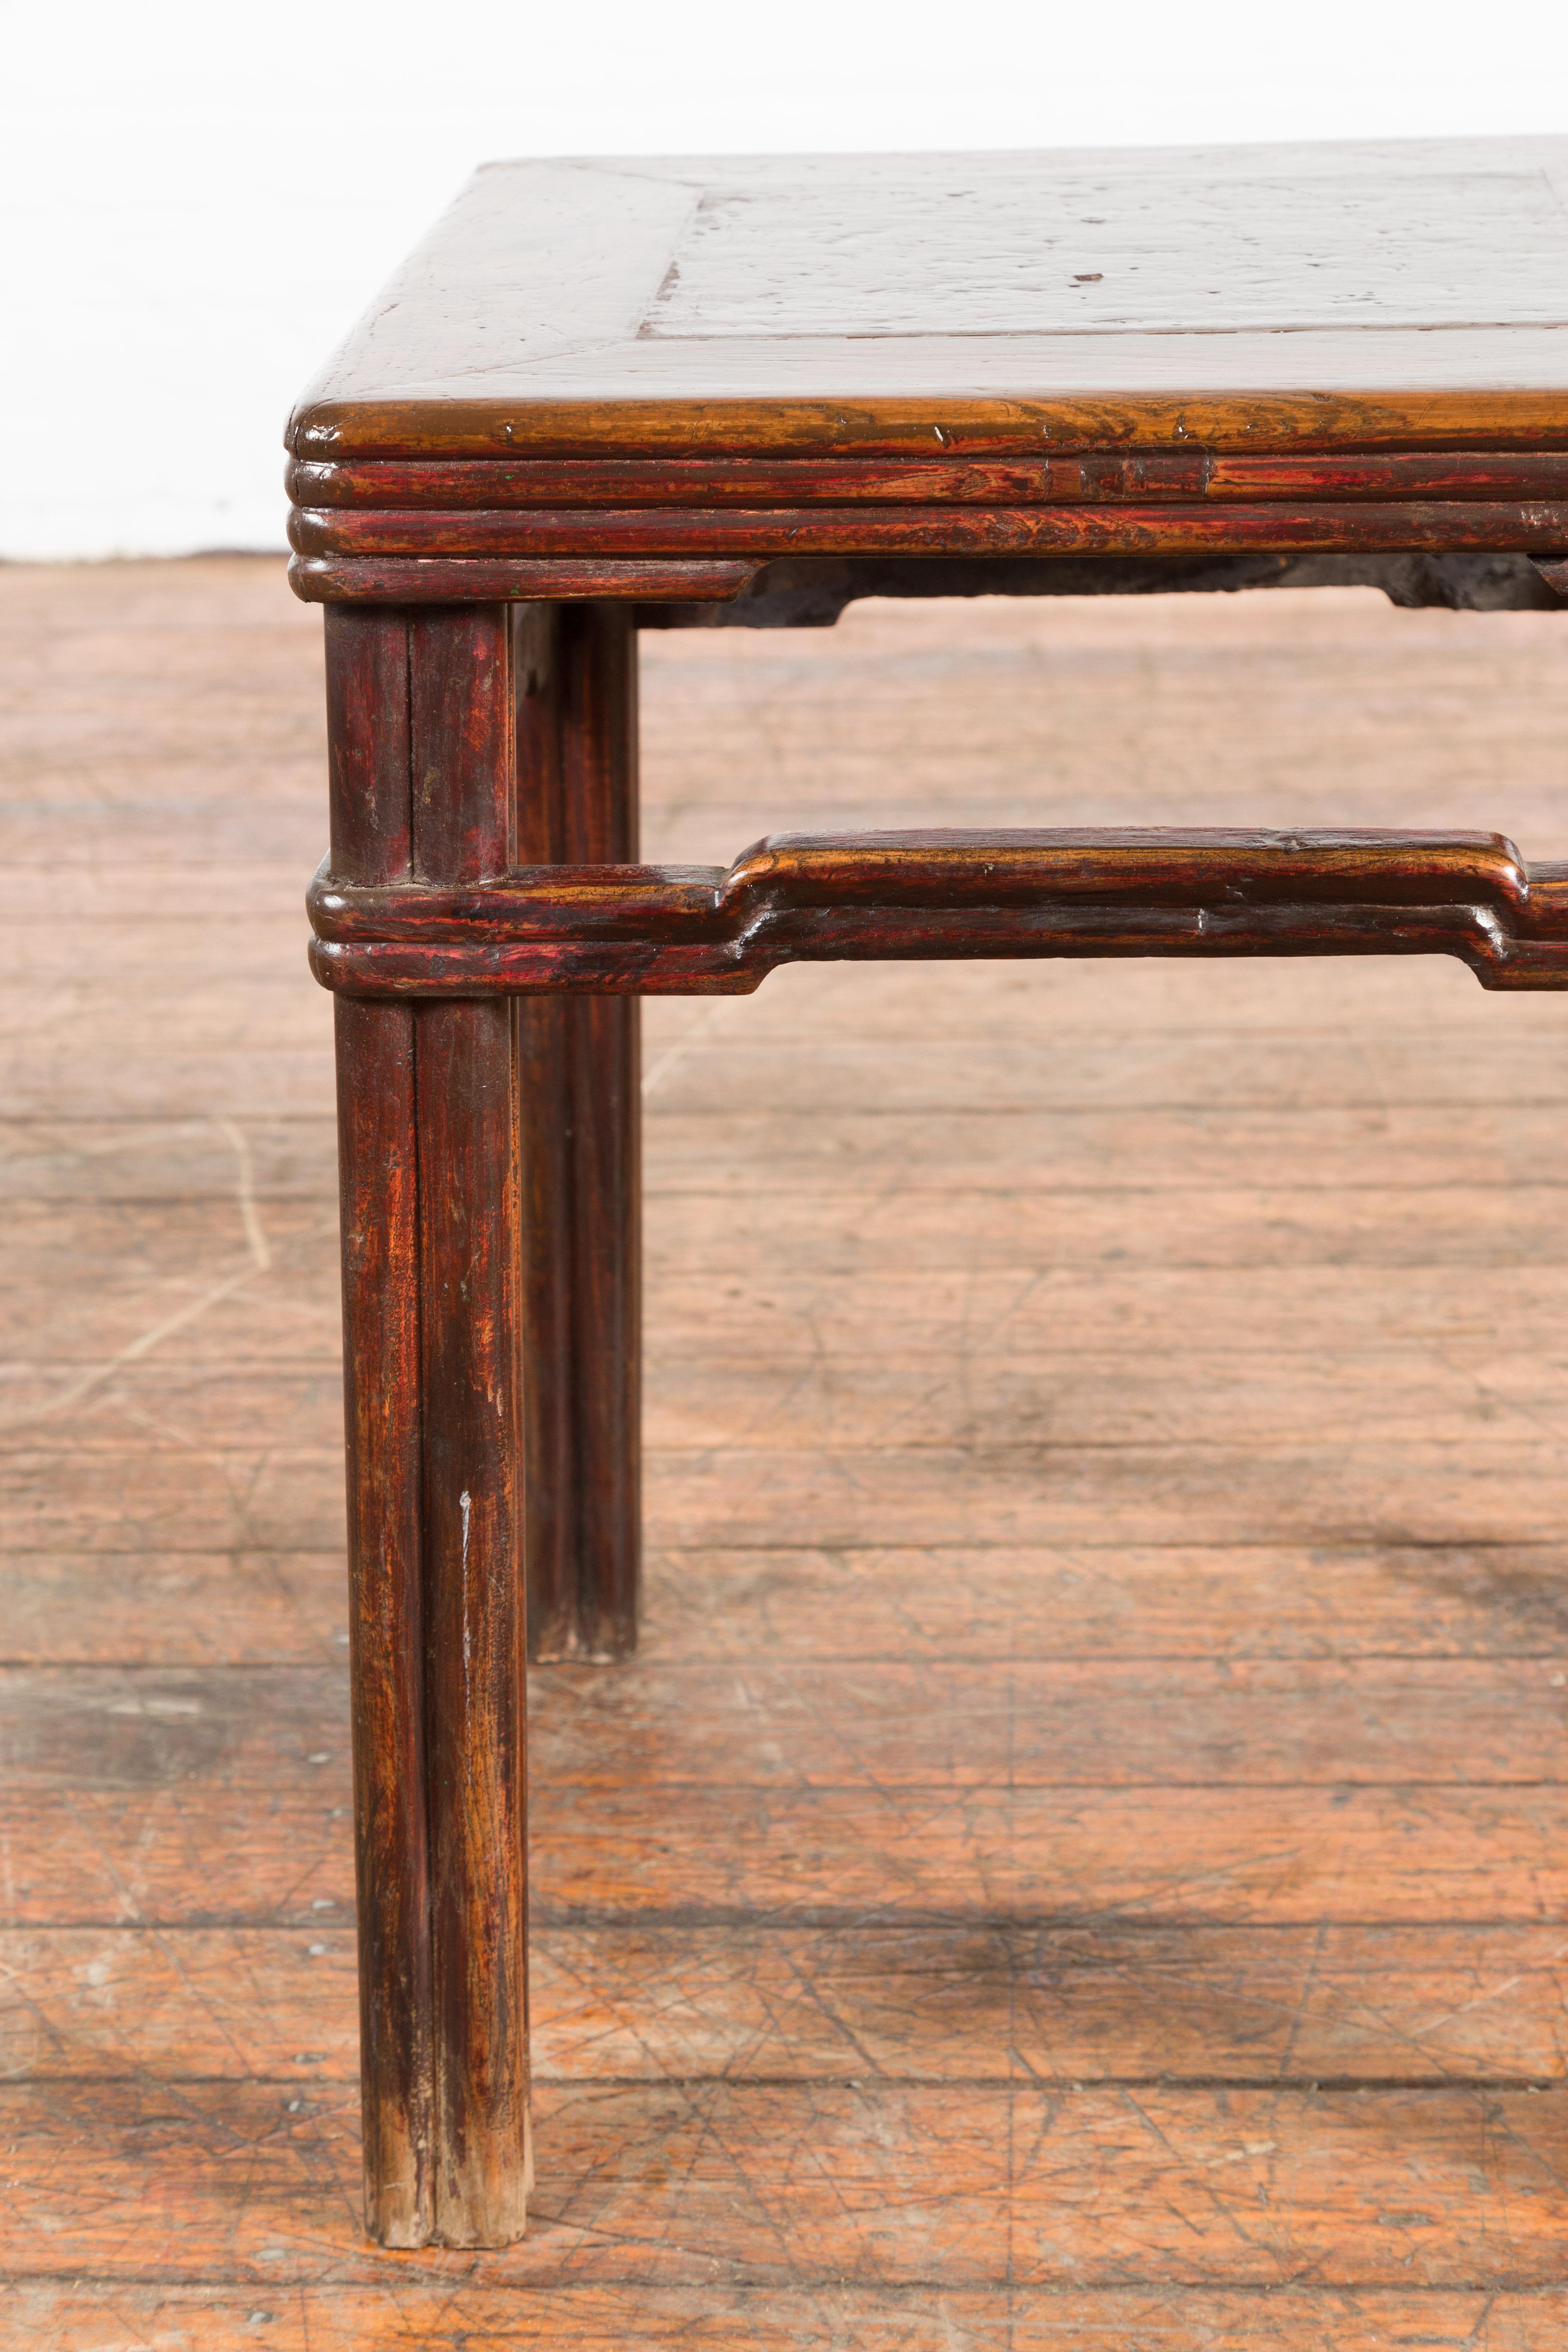 Chinese Qing Dynasty Period 19th Century Side Table with Humpback Stretchers For Sale 2